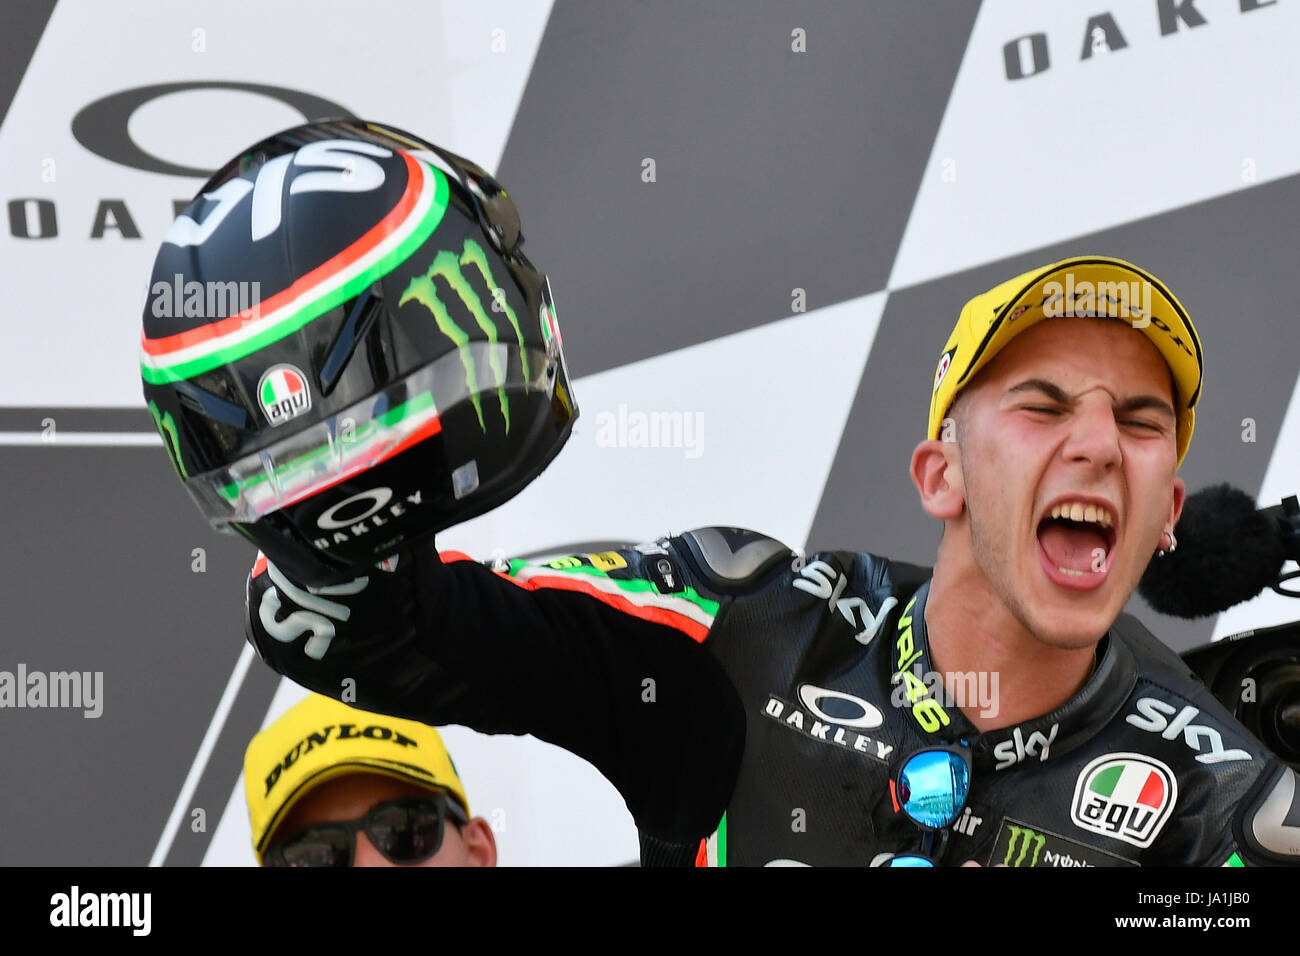 Florence, Italy. 04th June, 2017. SCARPERIA, FLORENCE, ITALY - JUNE 04:, 2017 Andrea Migno of Italy and SKY Racing Team VR46 celebrates his victory on the podium at the end the race Moto3 during MotoGP Gran Premio d'Italia- at Mugello Circuit. on june 04, 2017 in Scarperia Italy. (Photo by Marco Iorio) Credit: marco iorio/Alamy Live News Stock Photo